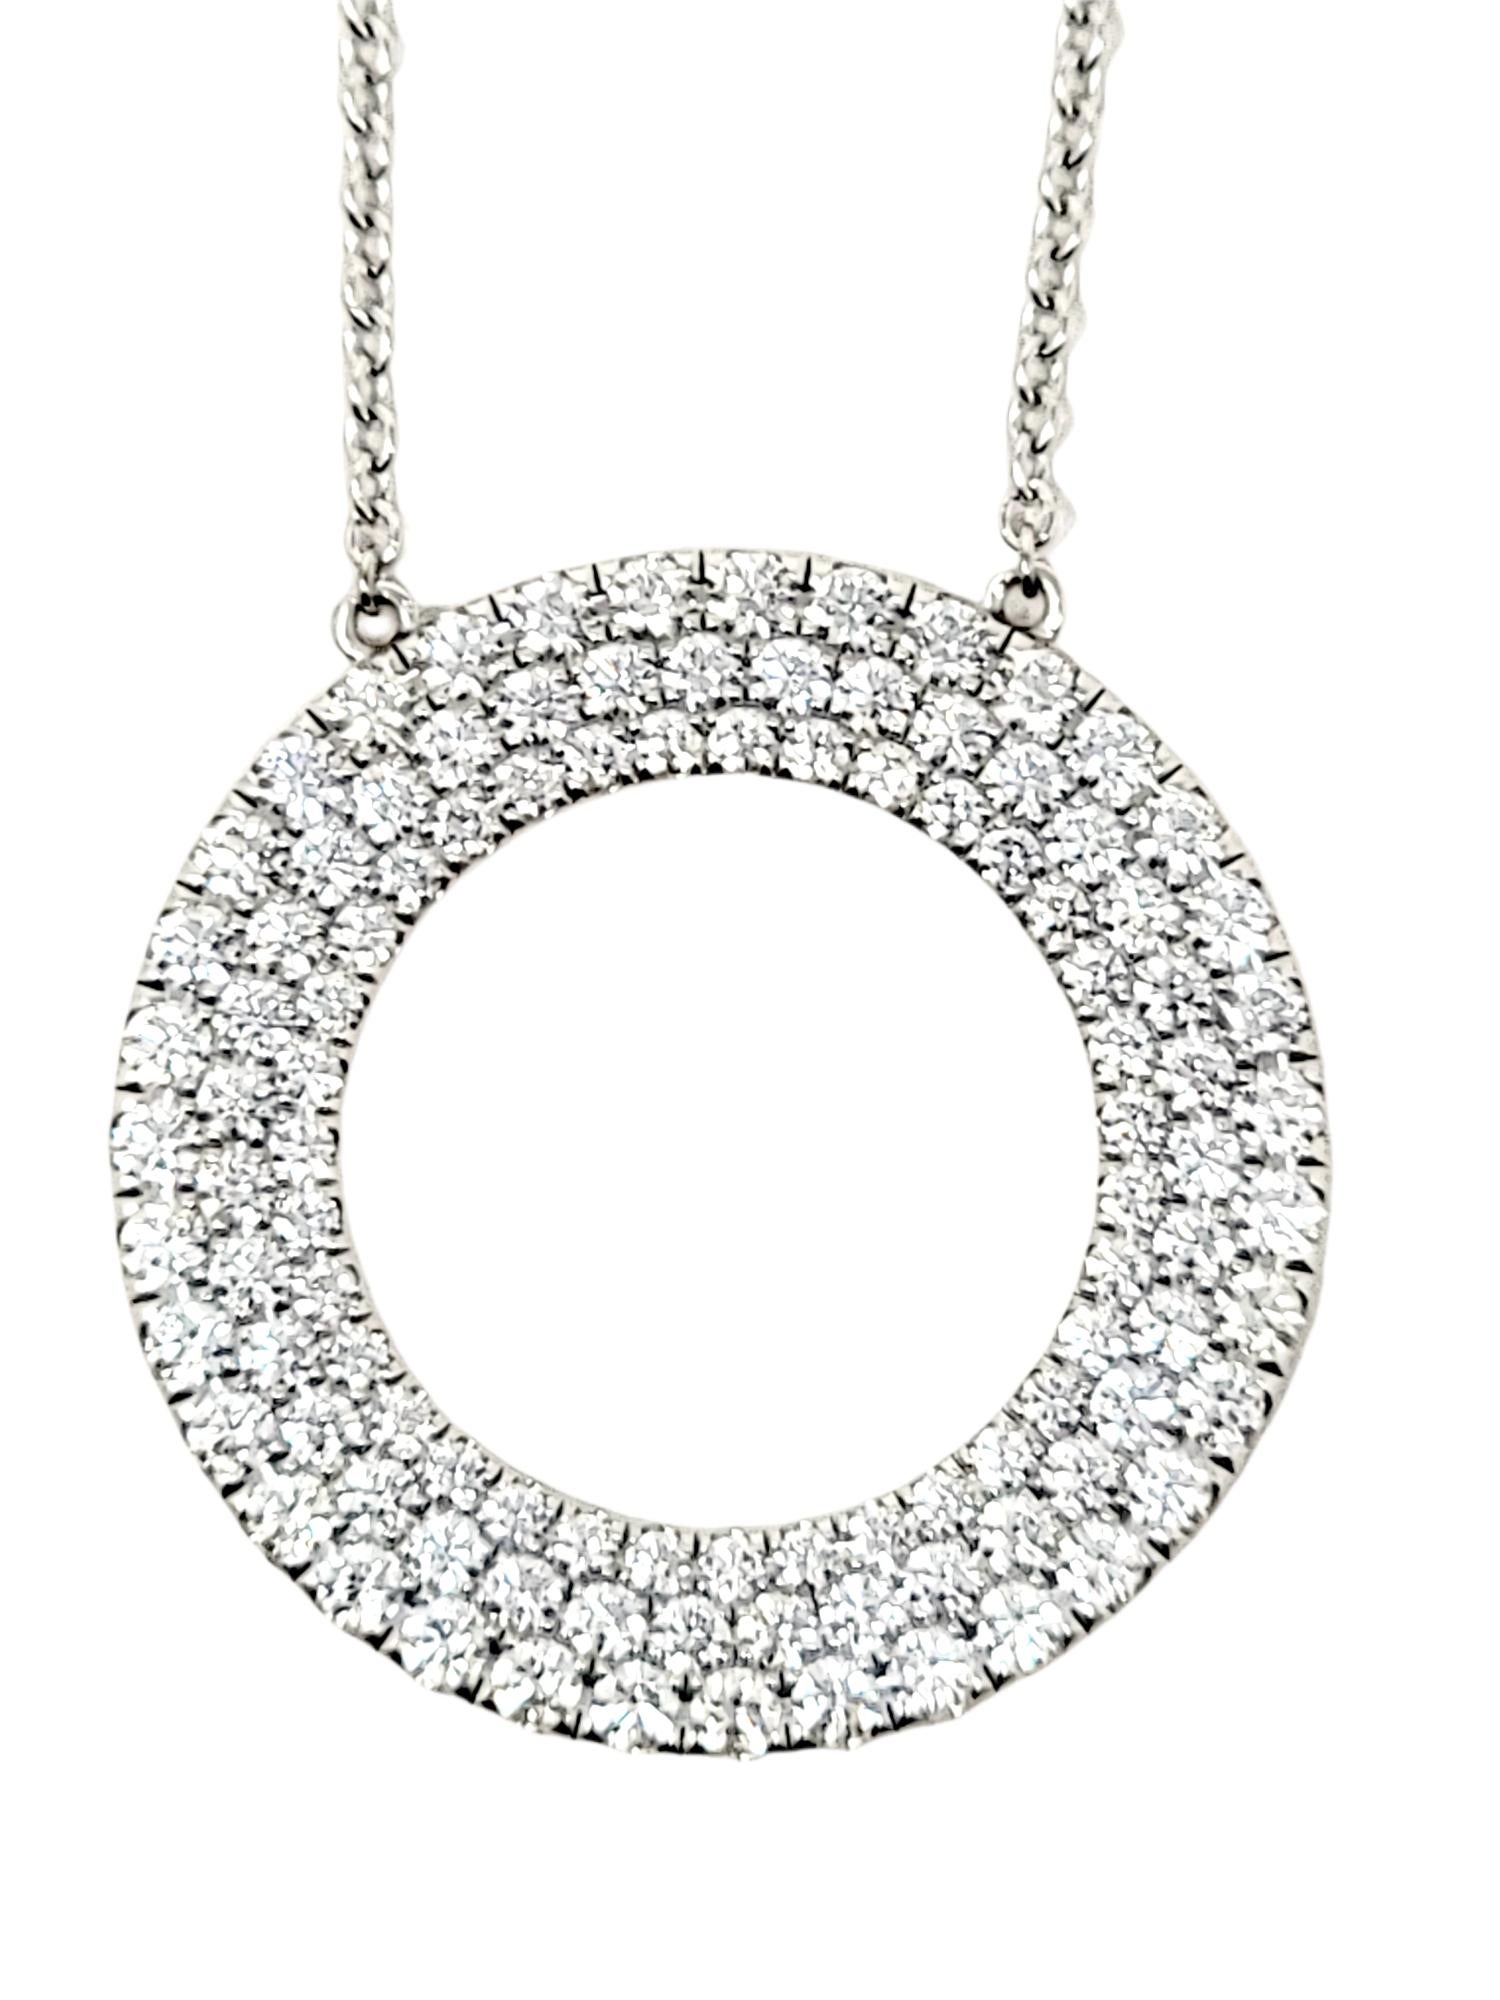 Gorgeous glittering diamond pendant necklace by Tiffany & Co. is the epitome of minimalist elegance. The Tiffany 'Metro' piece combines delicate, feminine features with a timeless design, making this a piece that you will wear time and time again. 